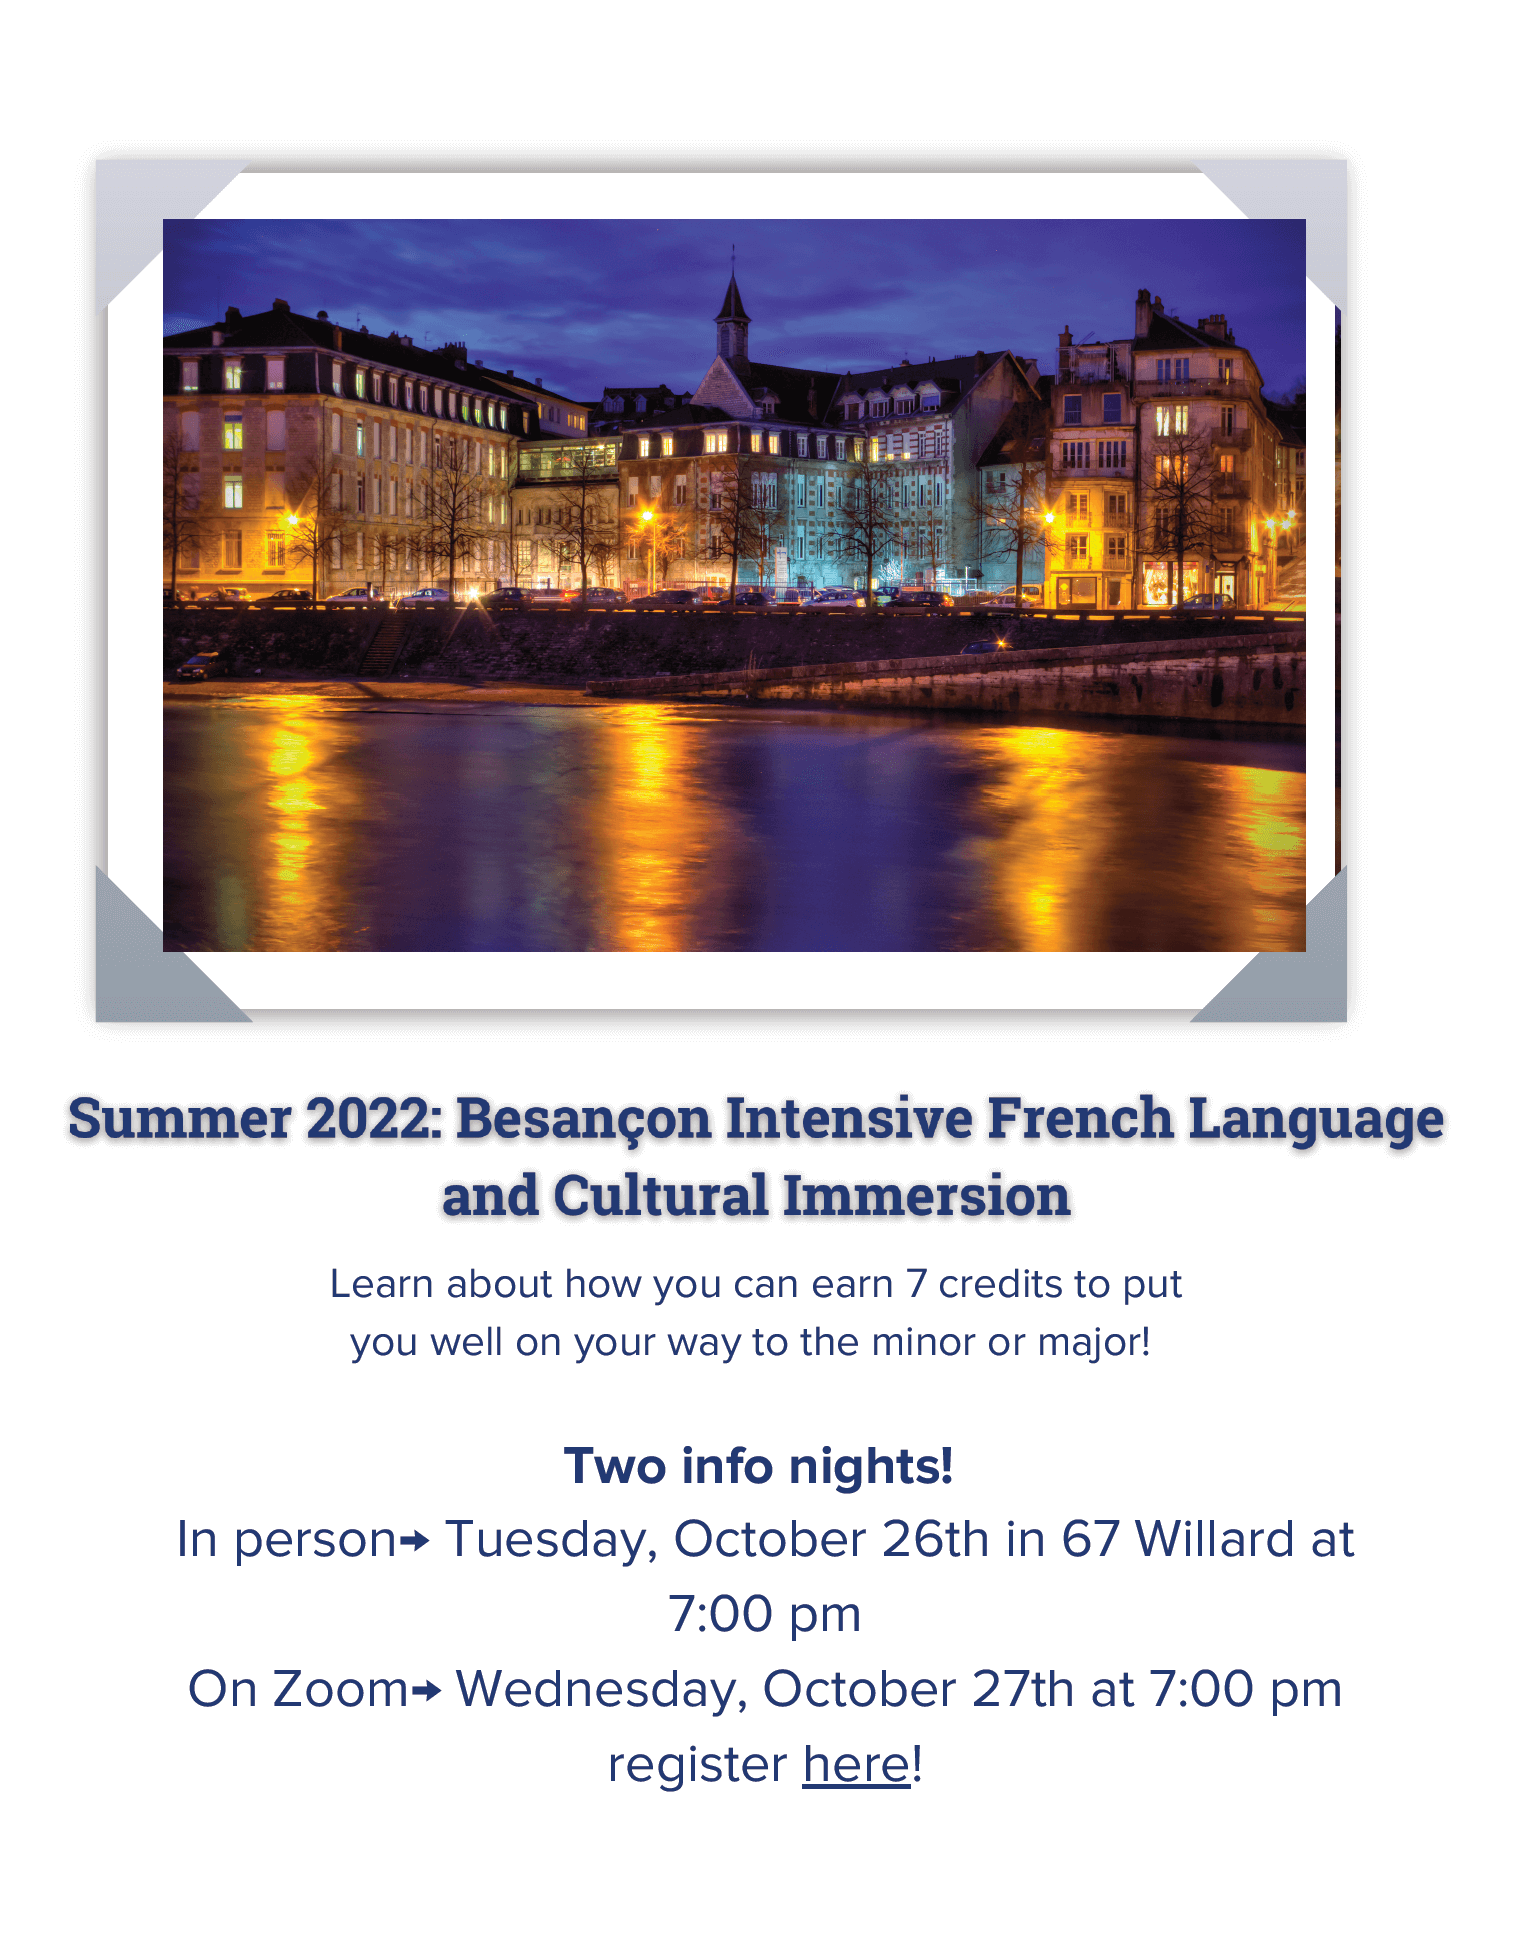 Besançon Intensive French Language and Cultural Immersion